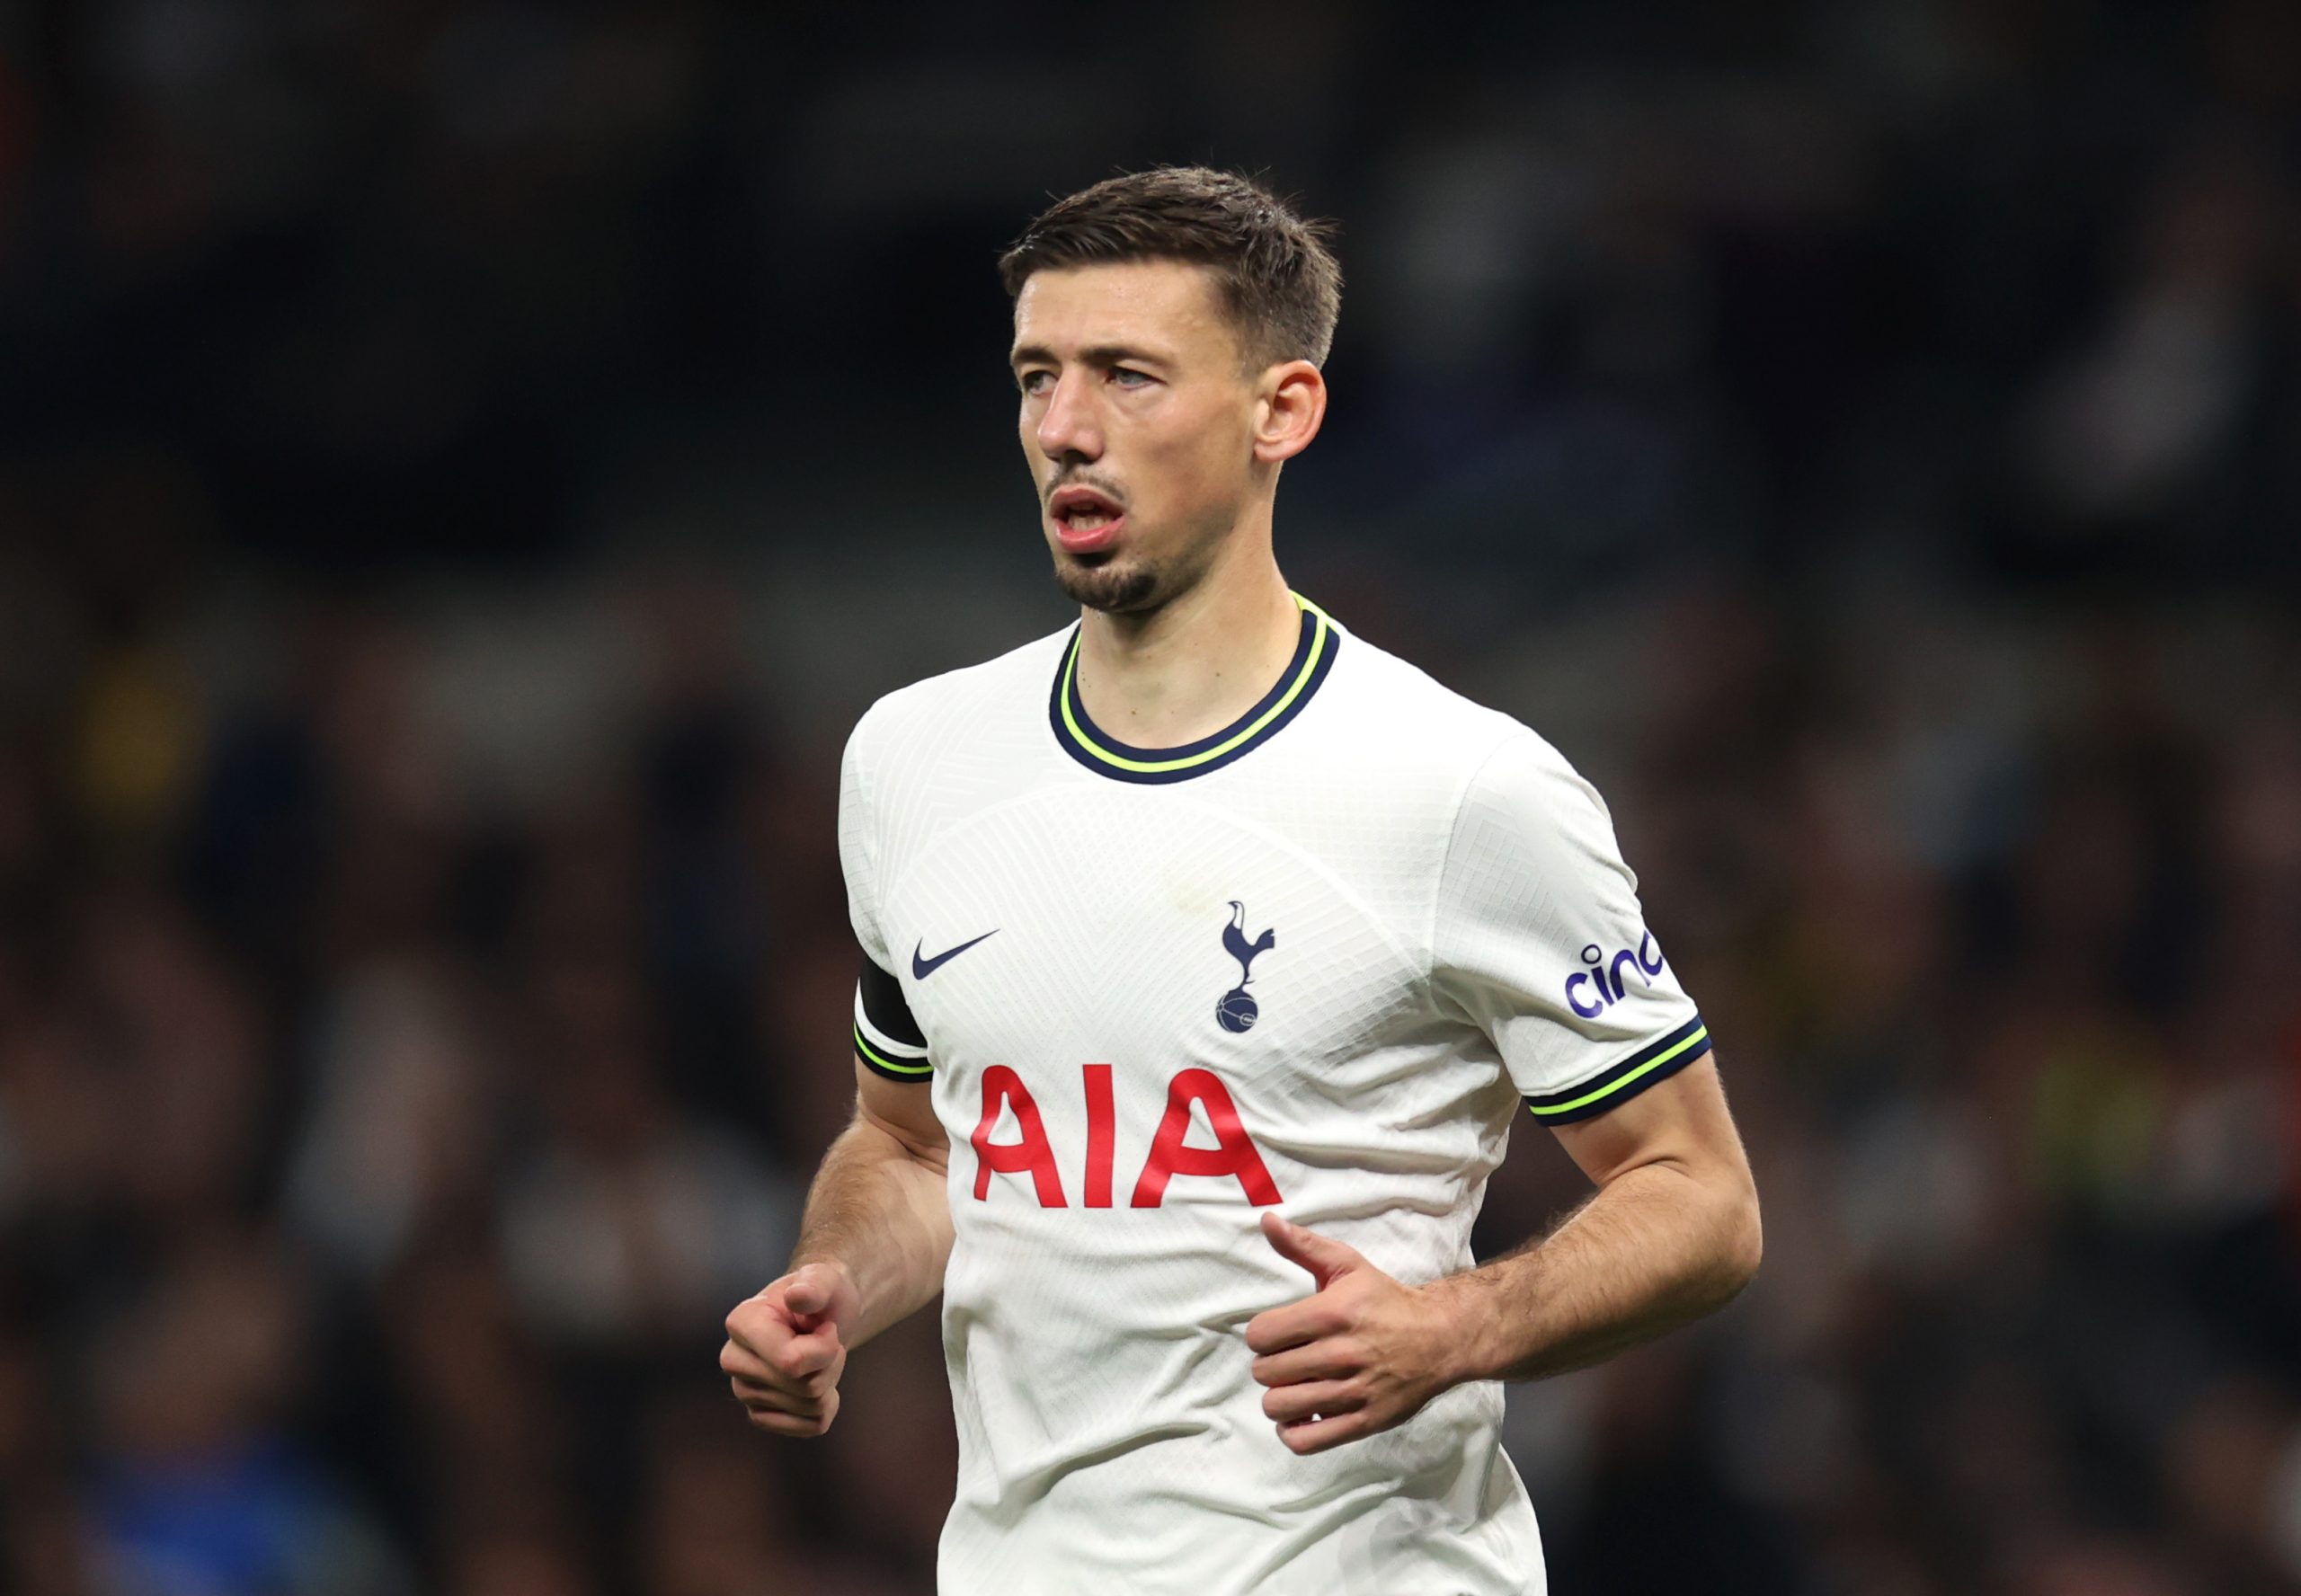 Napoli have joined the race for Tottenham Hotspur target Clement Lenglet.